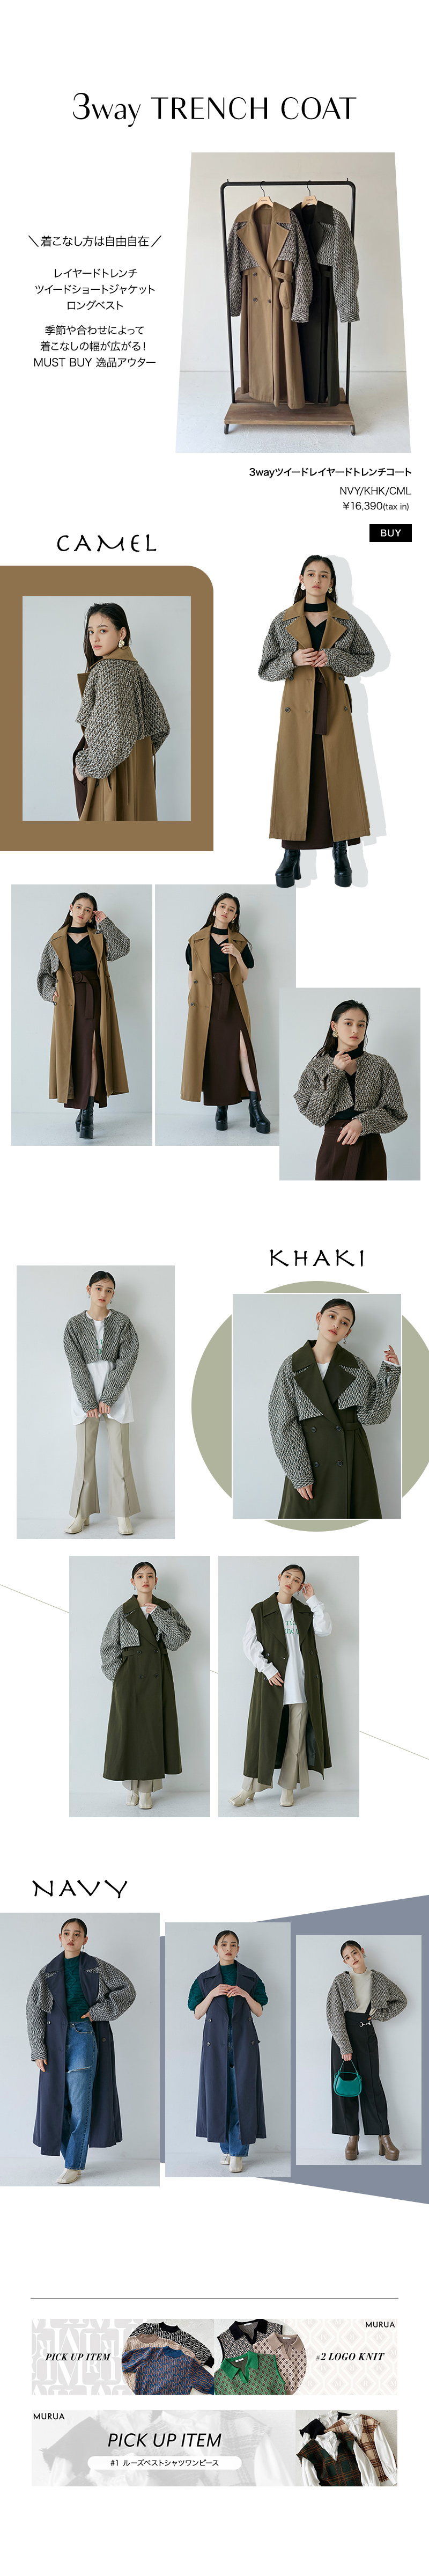 PICK UP ITEM #3 3way TRENCH COAT title